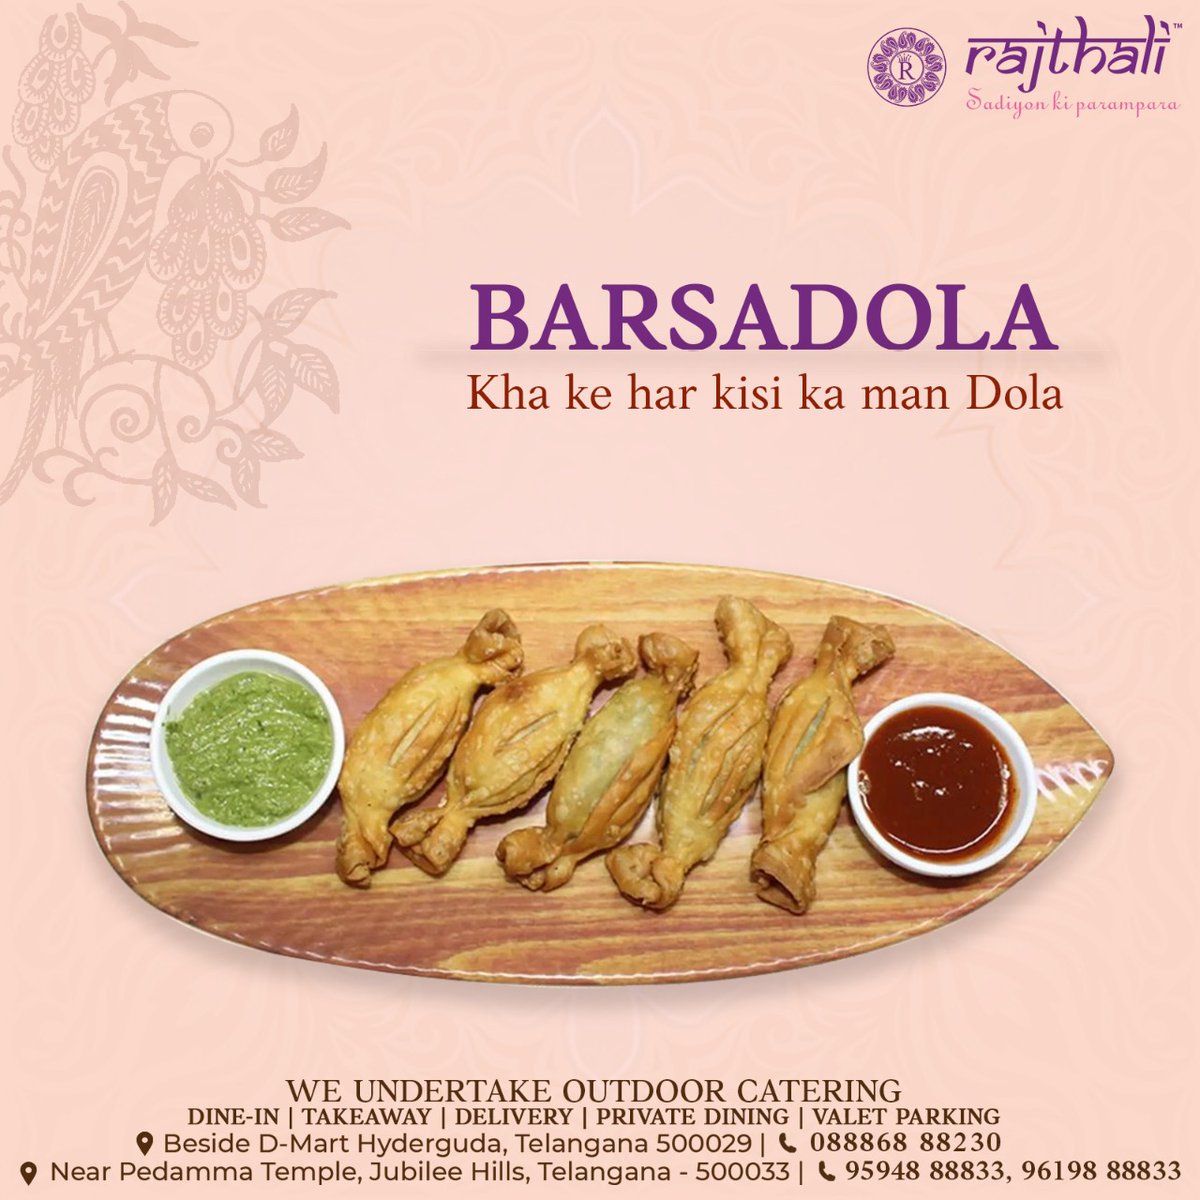 Farsans or snacks are a famous #gujarati or #Rajasthani snacks perfect as a starter or even to be had with our daily even Chai or just by itself as snacks. Barsadola at Rajthali an age old recipe made the age old way. Do ask for it when you visit.
#barsadola #farsans #indiansnack